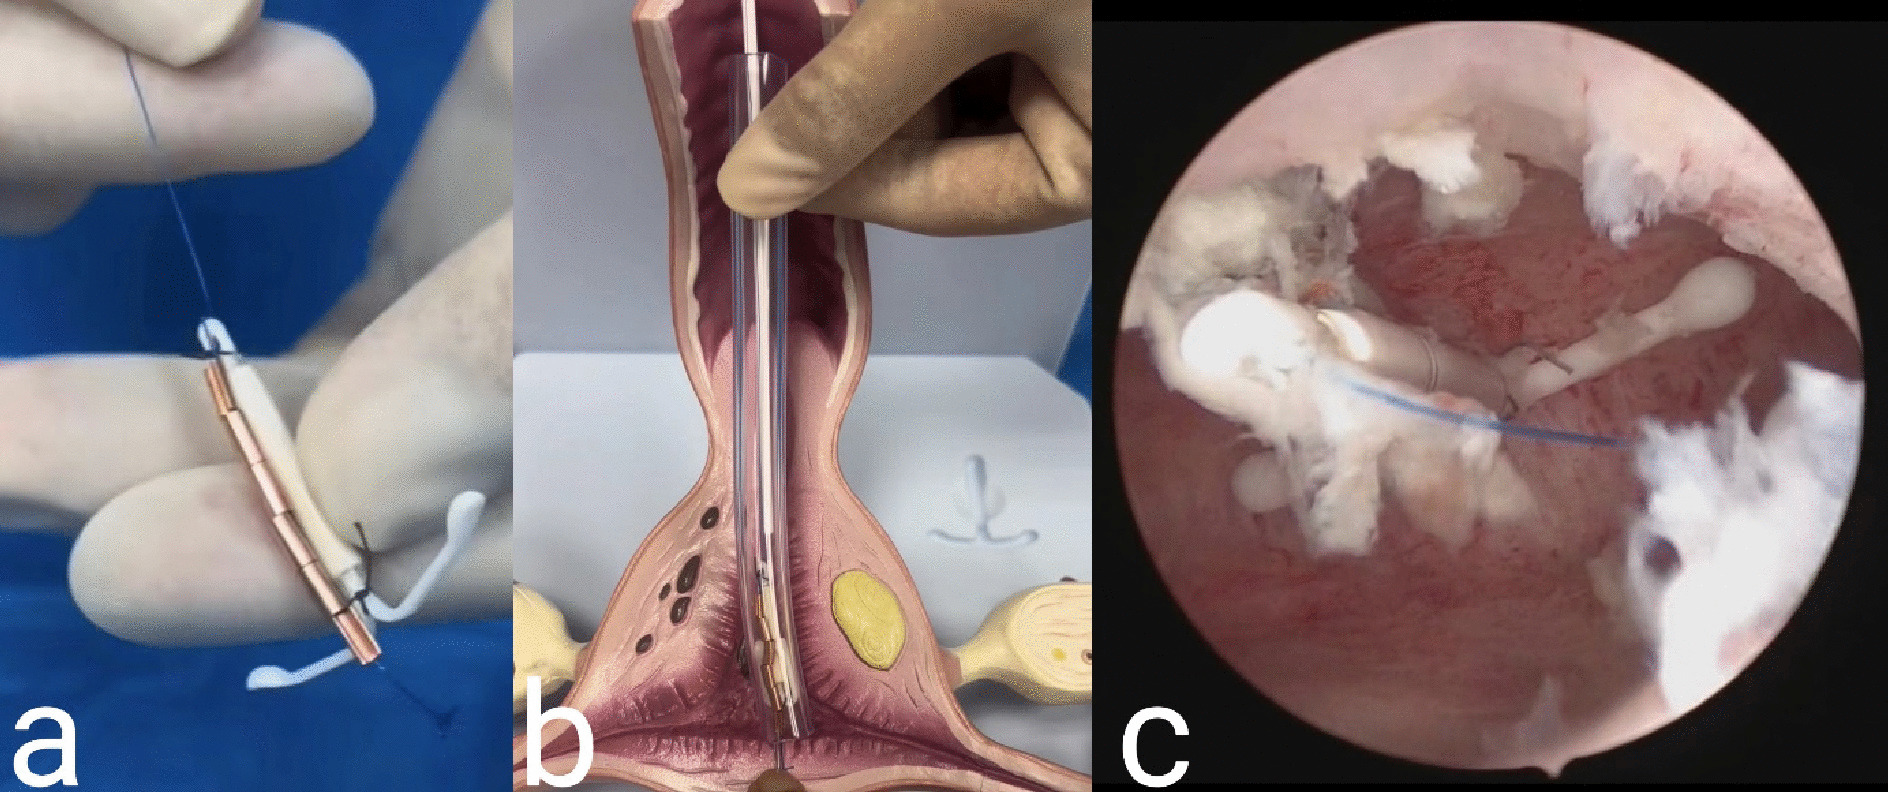 Simple and Novel Technique of Fixation for Levonorgestrel-Releasing Intrauterine Device for the Treatment of Uterine Adenomyosis